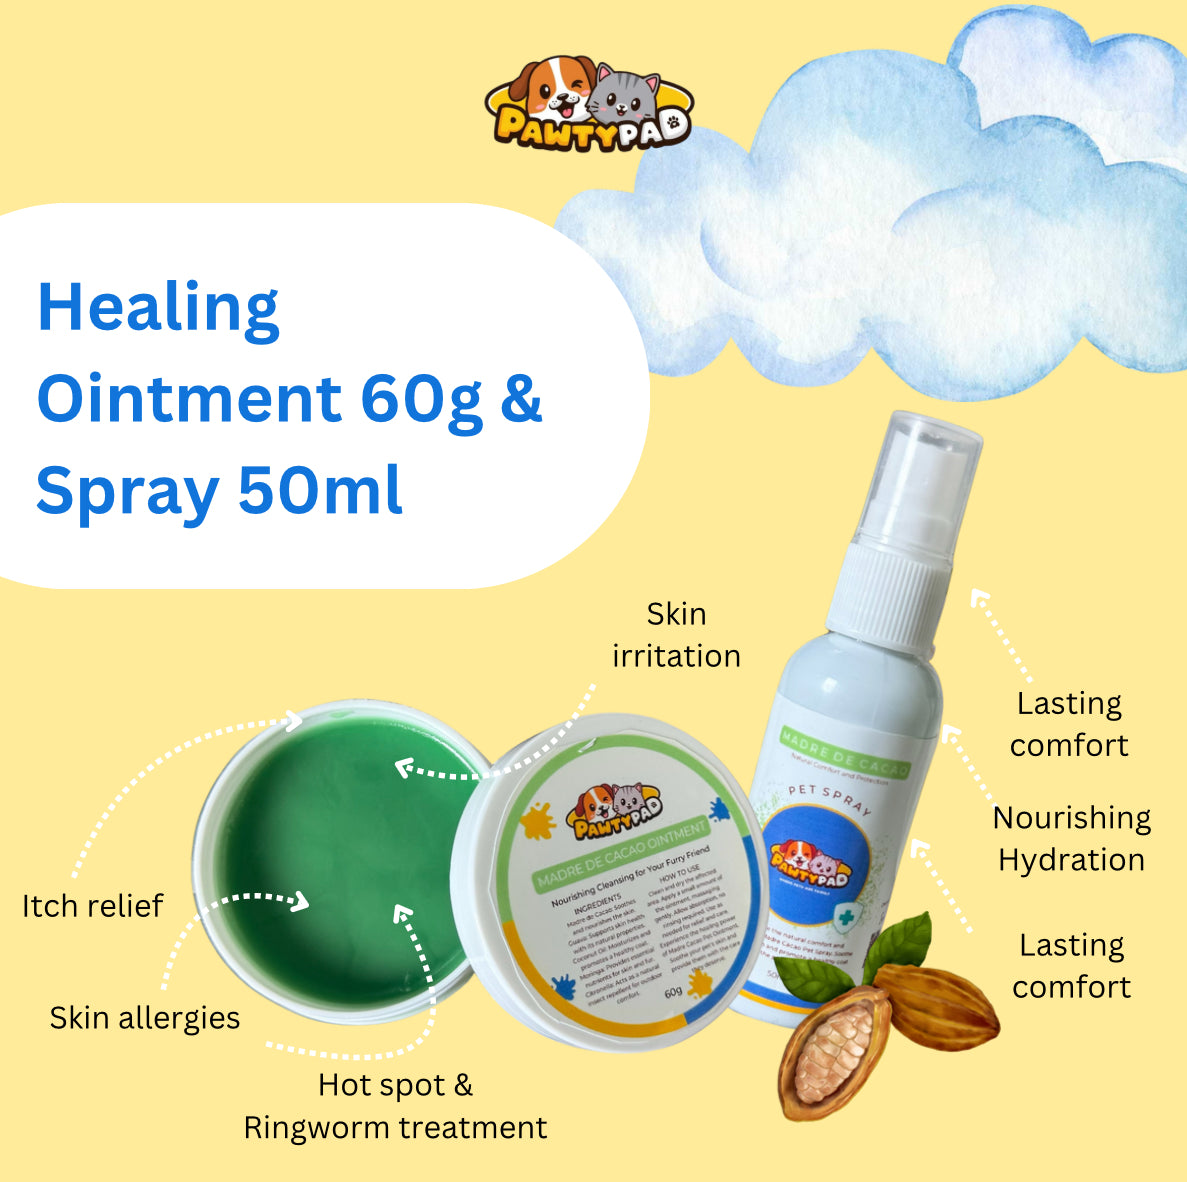 Healing Ointment & Spray